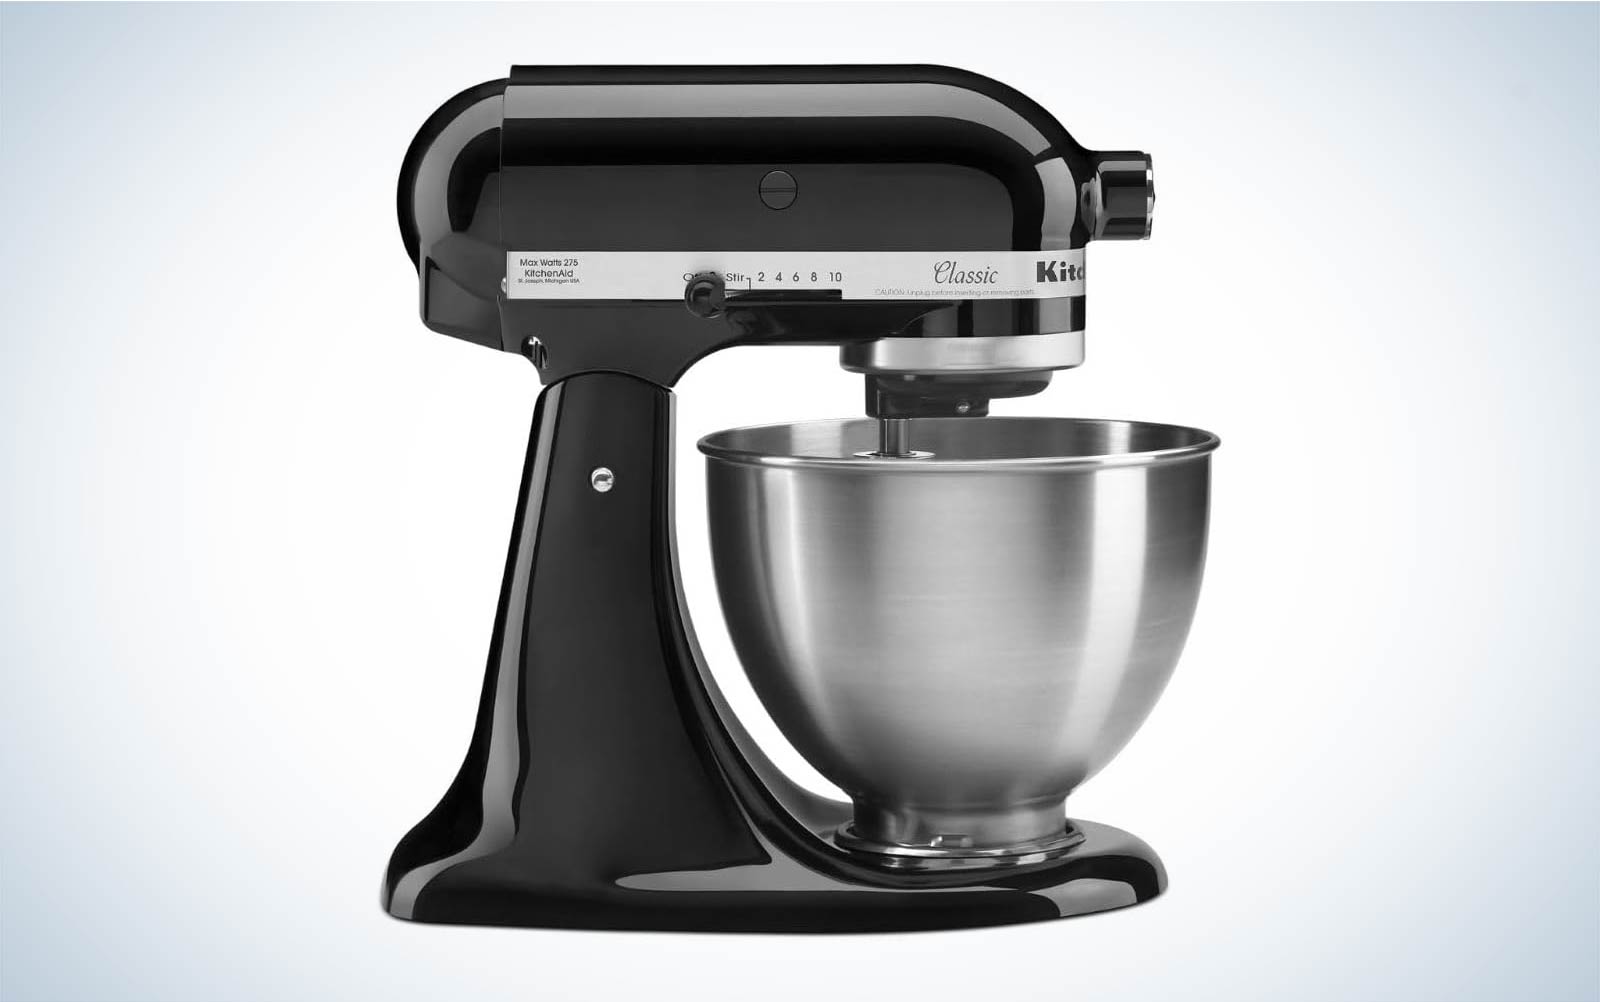 KitchenAid Stand Mixers Are Worth the Hype: Save 30% on One for